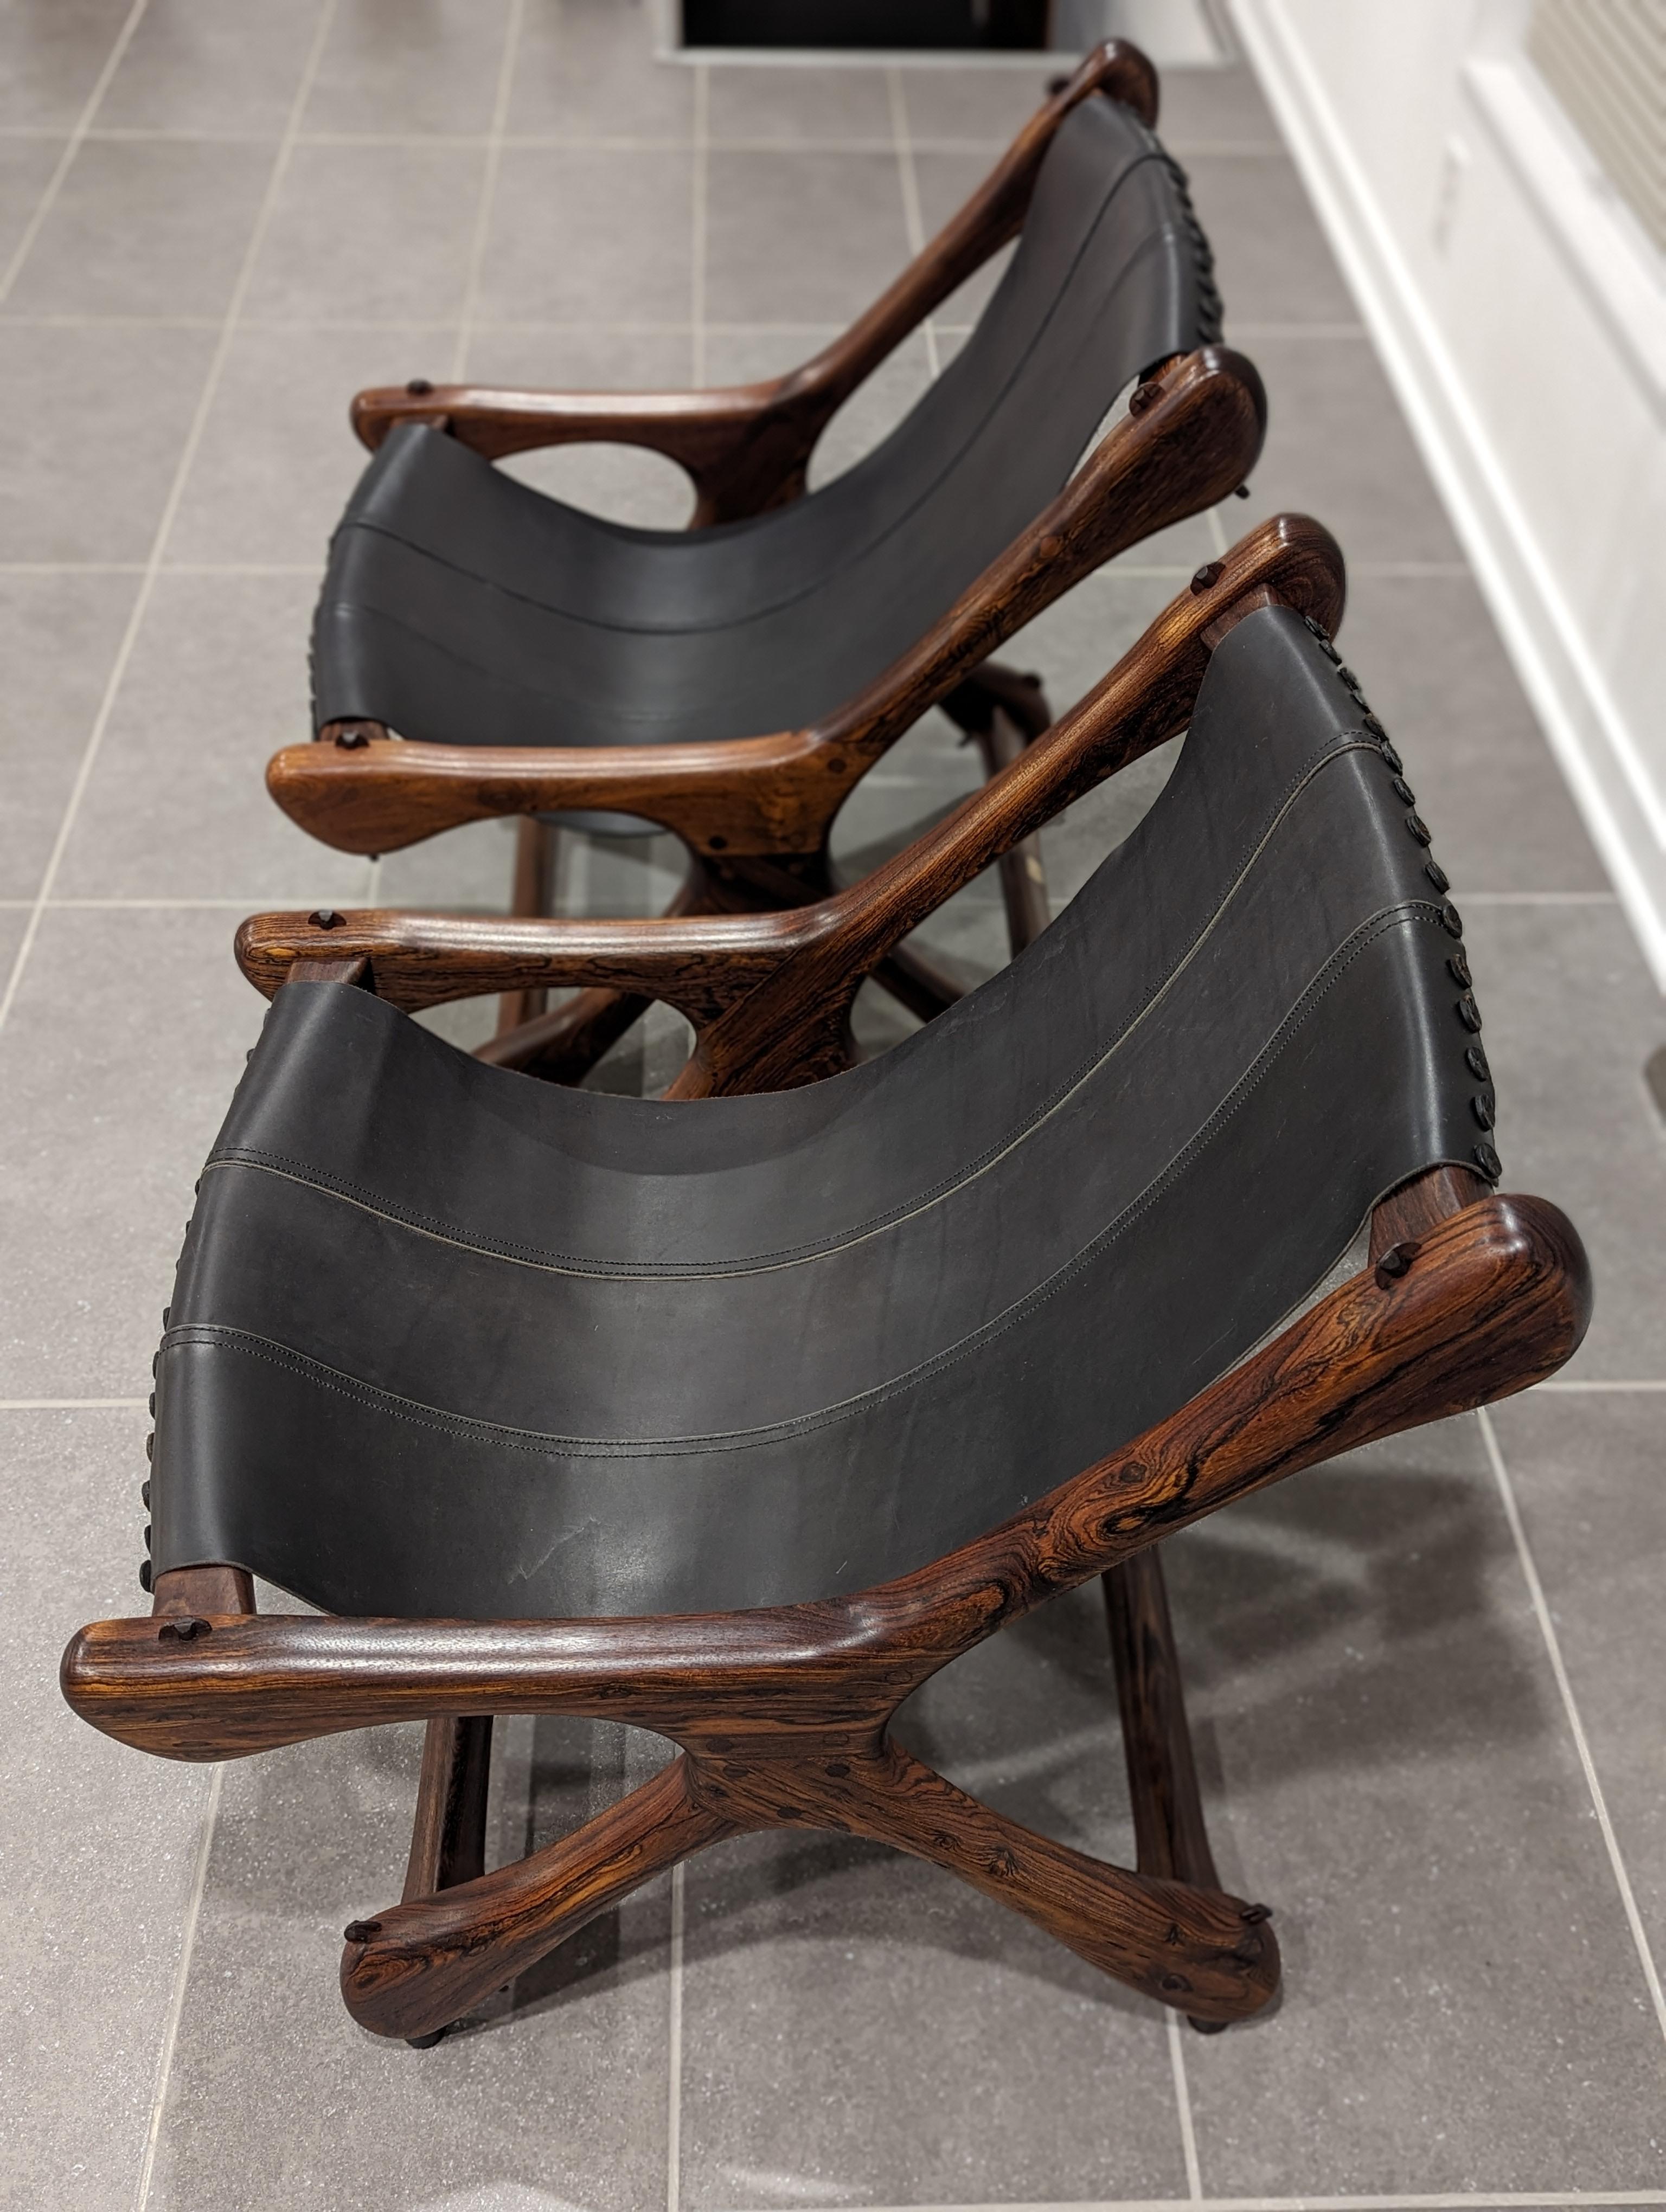 Don Shoemaker Sloucher Rosewood & Leather Sling Chairs for Señal, S.A., 1960s For Sale 12